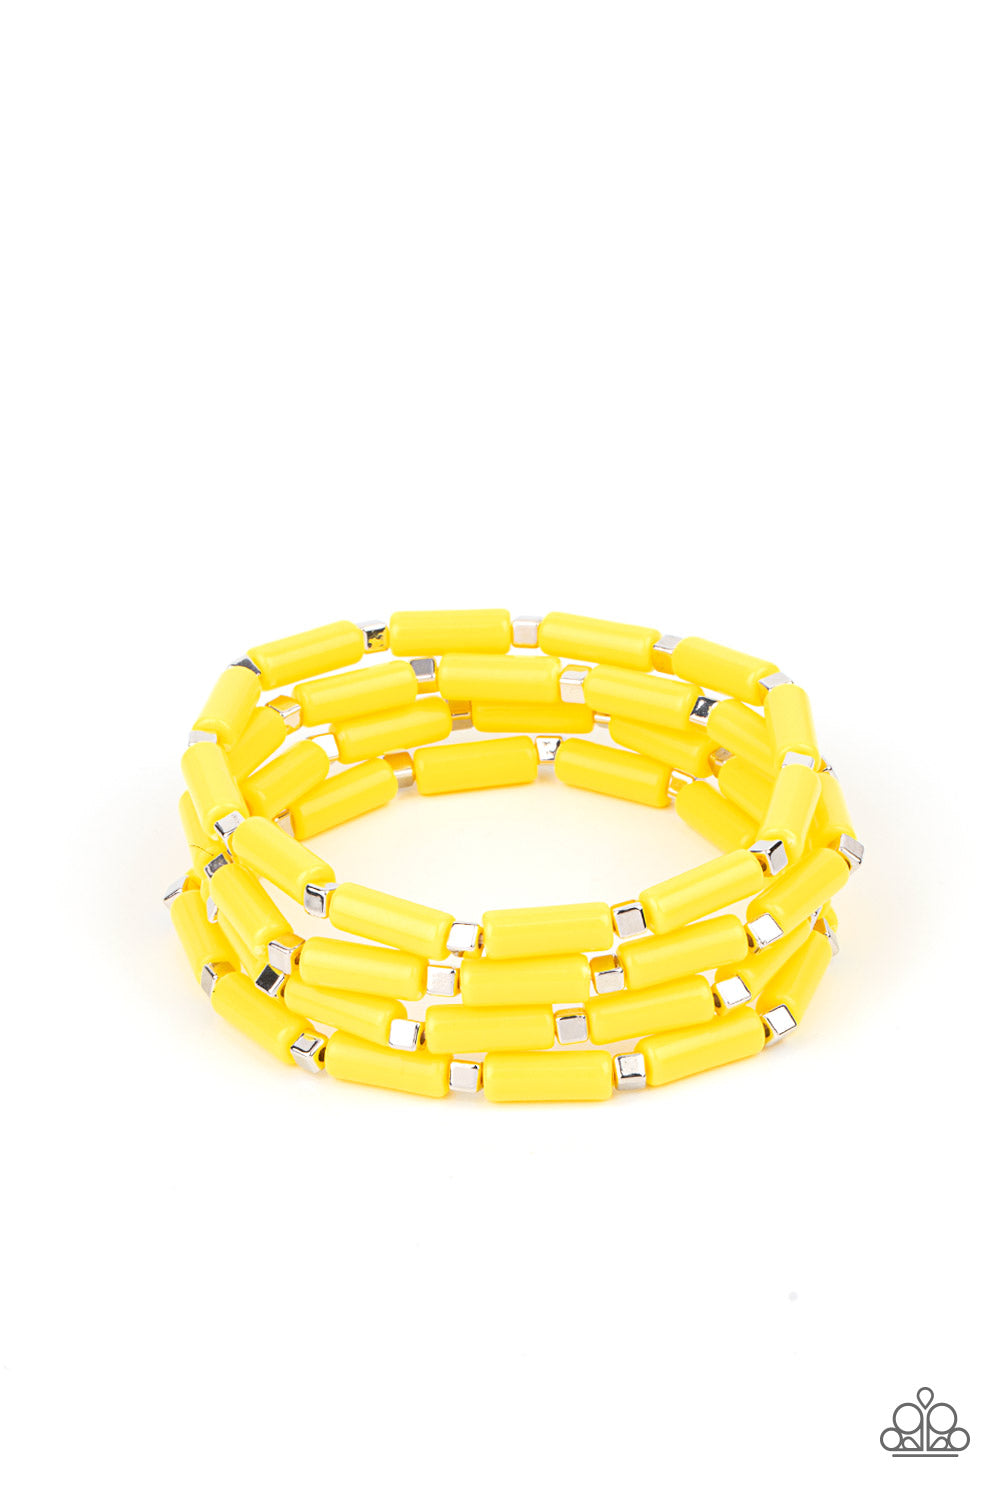 A playful collection of dainty silver cube beads and cylindrical Illuminating beads are threaded along stretchy bands, creating colorful layers around the wrist.